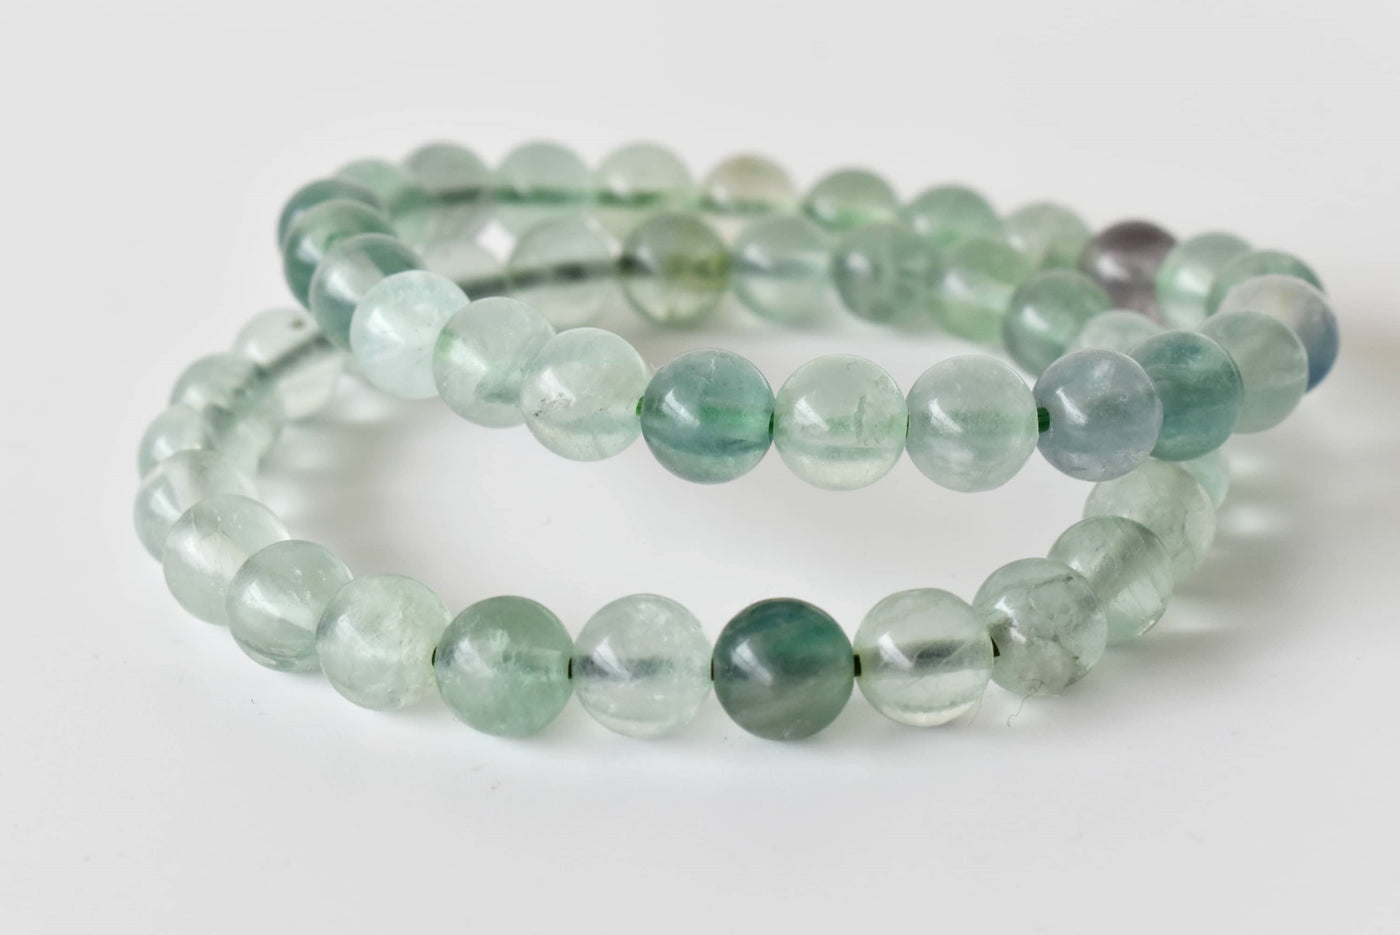 Green Fluorite Bracelet (Intuition and Sychic Awareness)